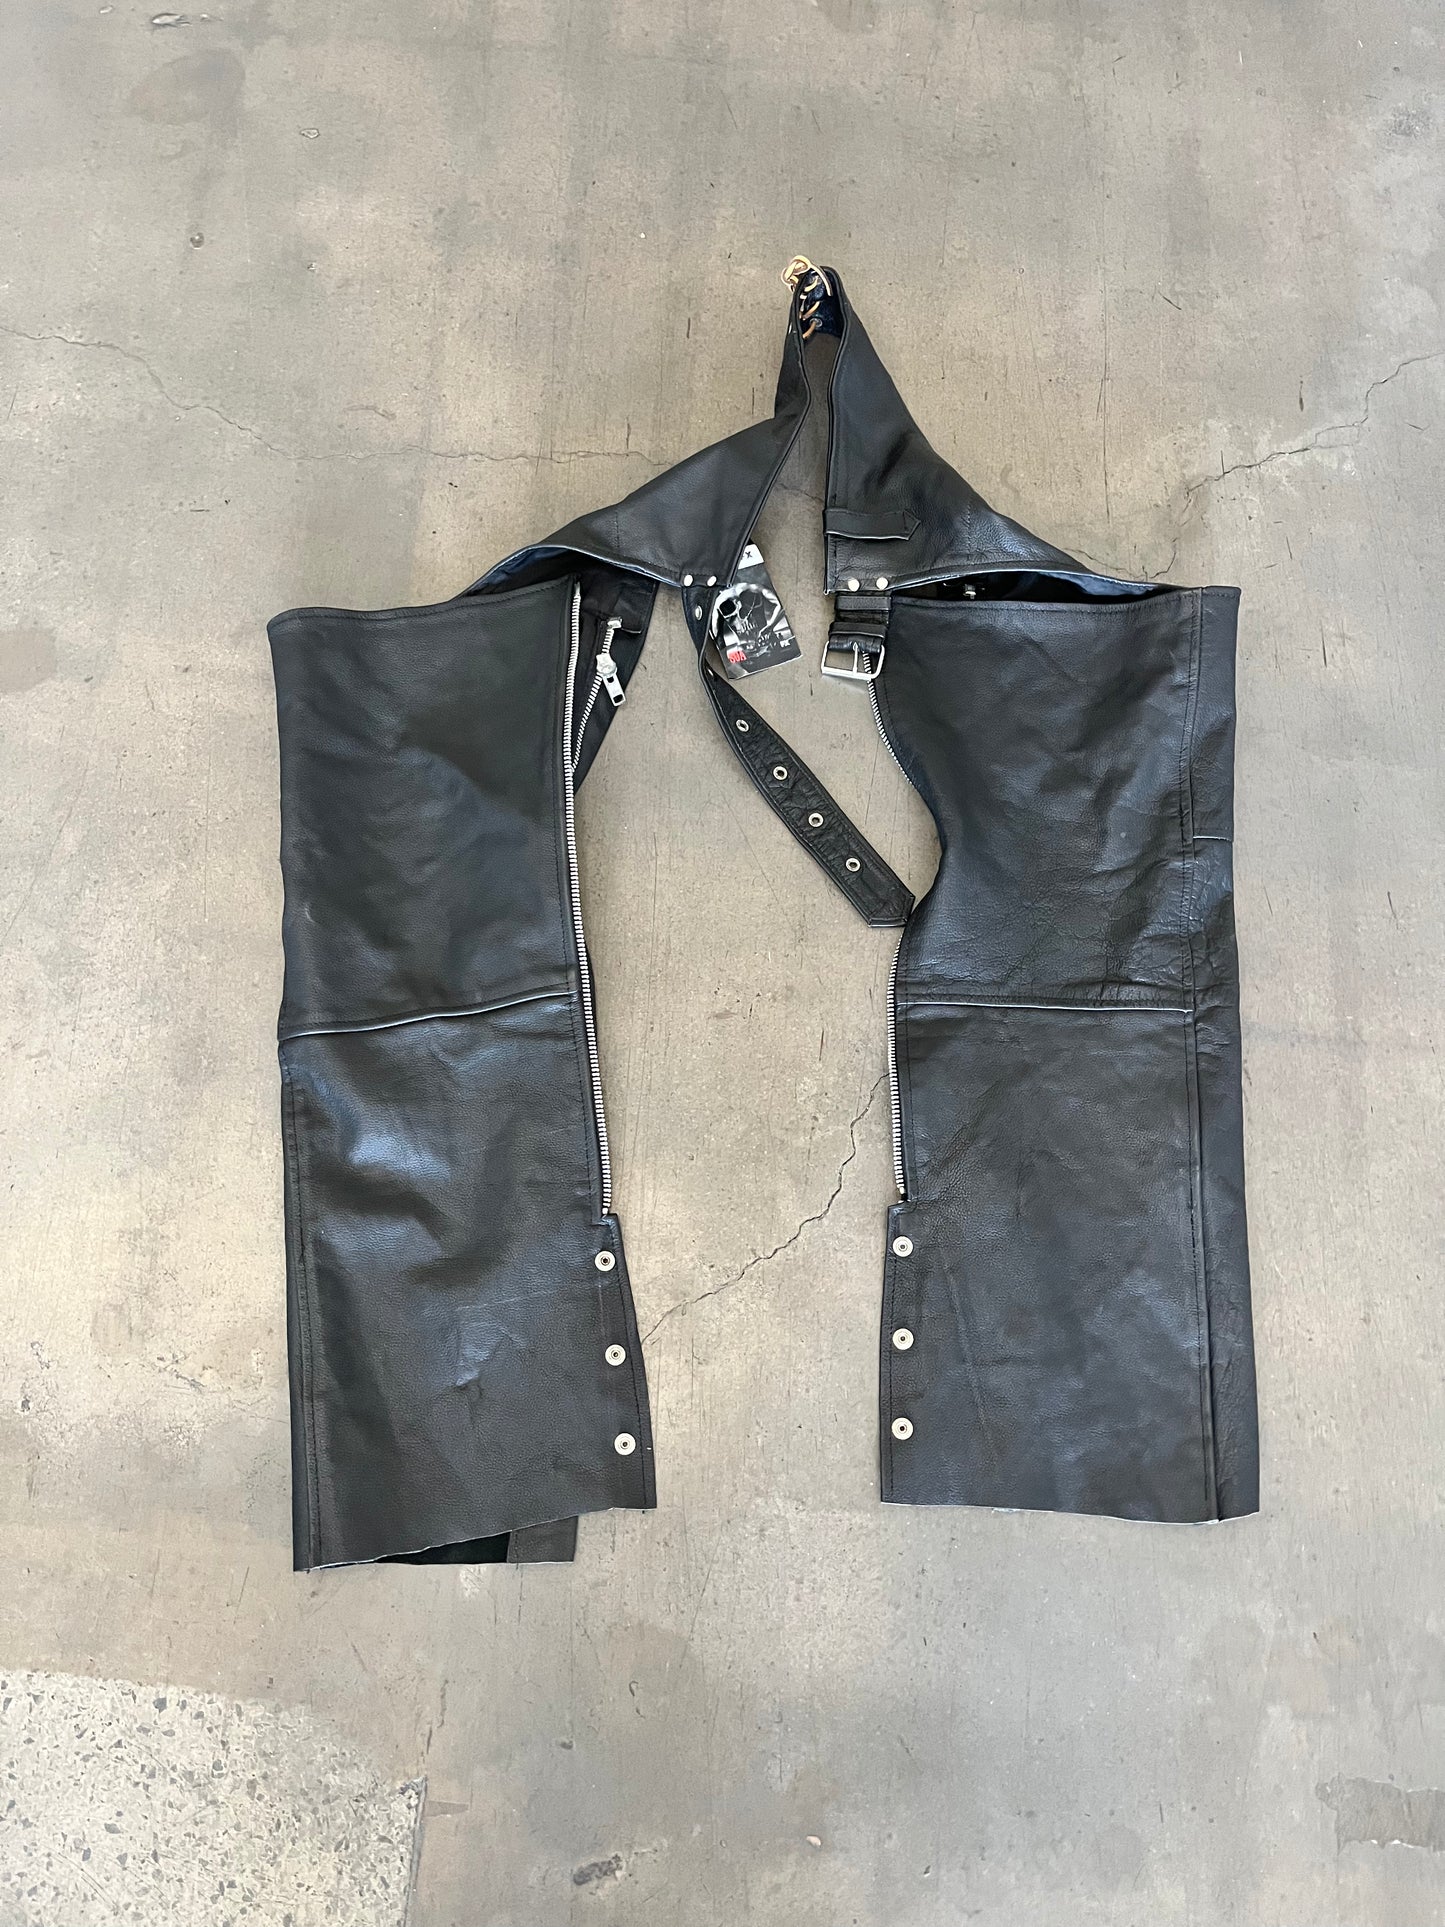 SONS OF ANARCHY : Jackson Teller's Black Leather Motorcycle Stunt Chaps